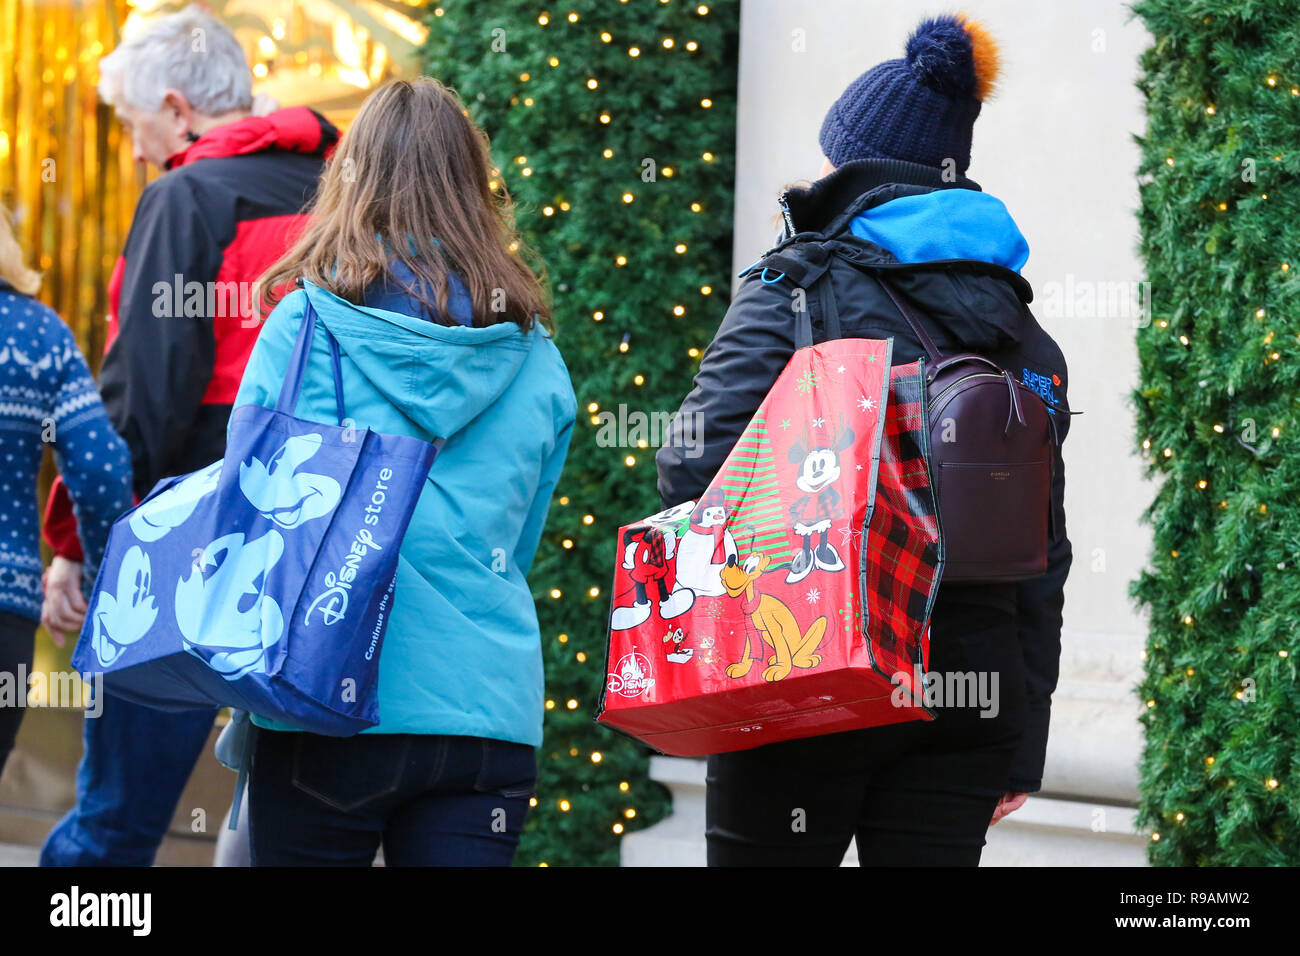 London, UK. 21st December 2018. Women are seen with Disney shopping bags on London’s Oxford Street with 3 days to Christmas Day. Retailers are expecting a rush of shoppers in the lead-up to Christmas with a number of stores starting their Winter Sales. Credit: SOPA Images Limited/Alamy Live News Stock Photo